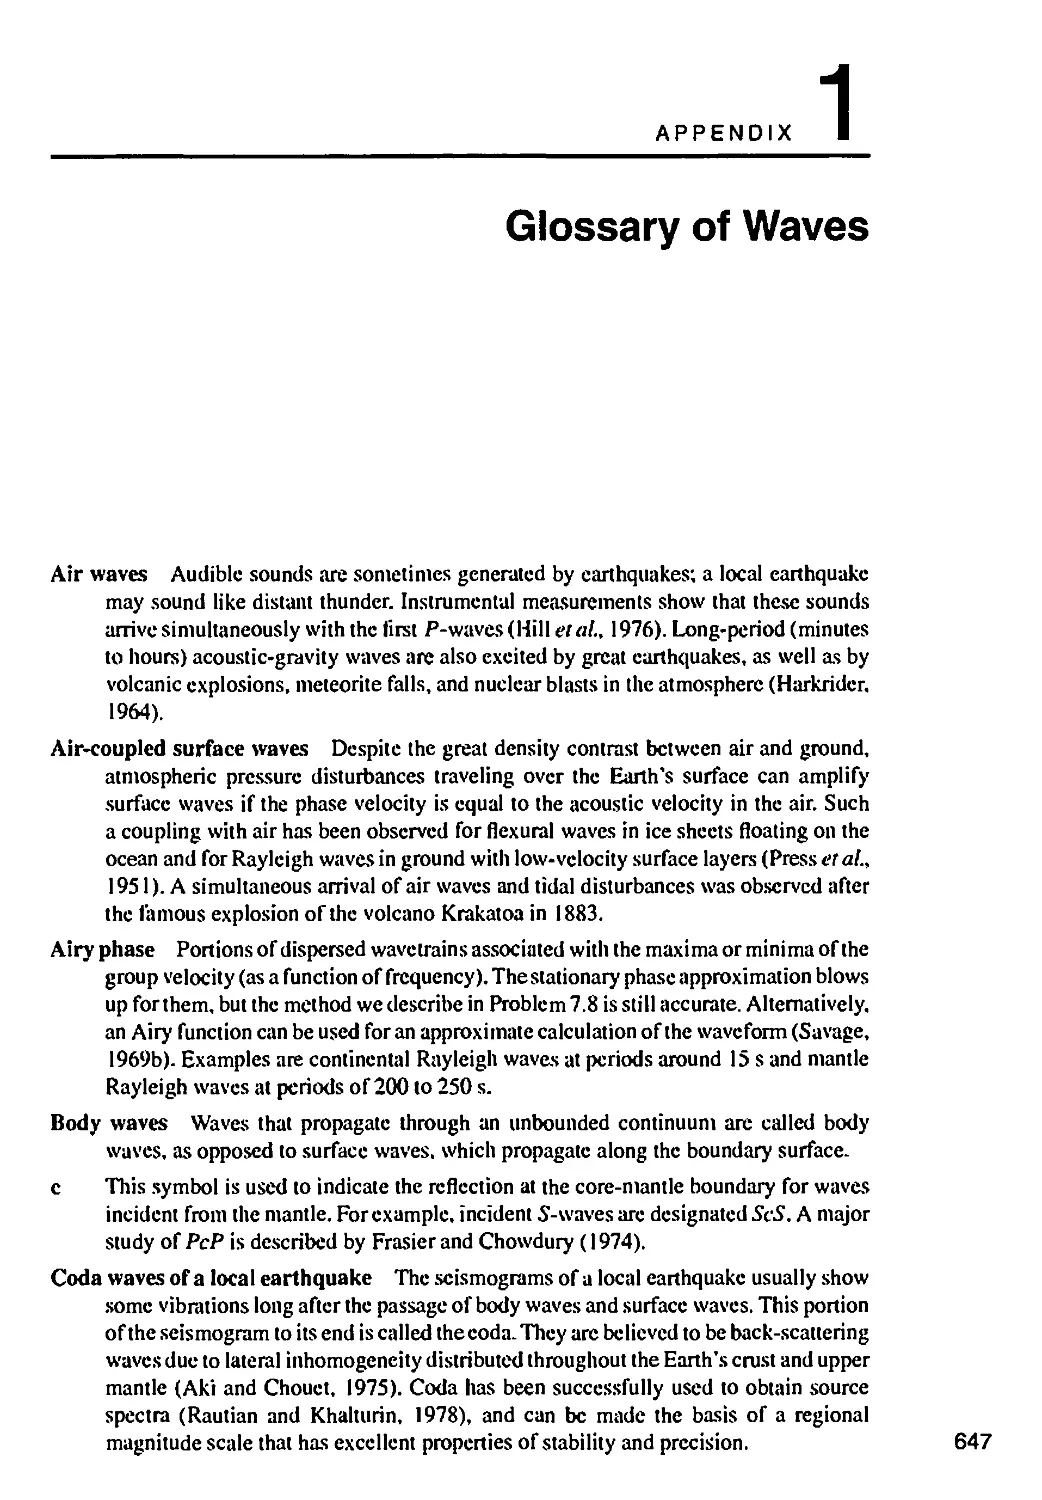 Appendix 1: Glossary of Waves